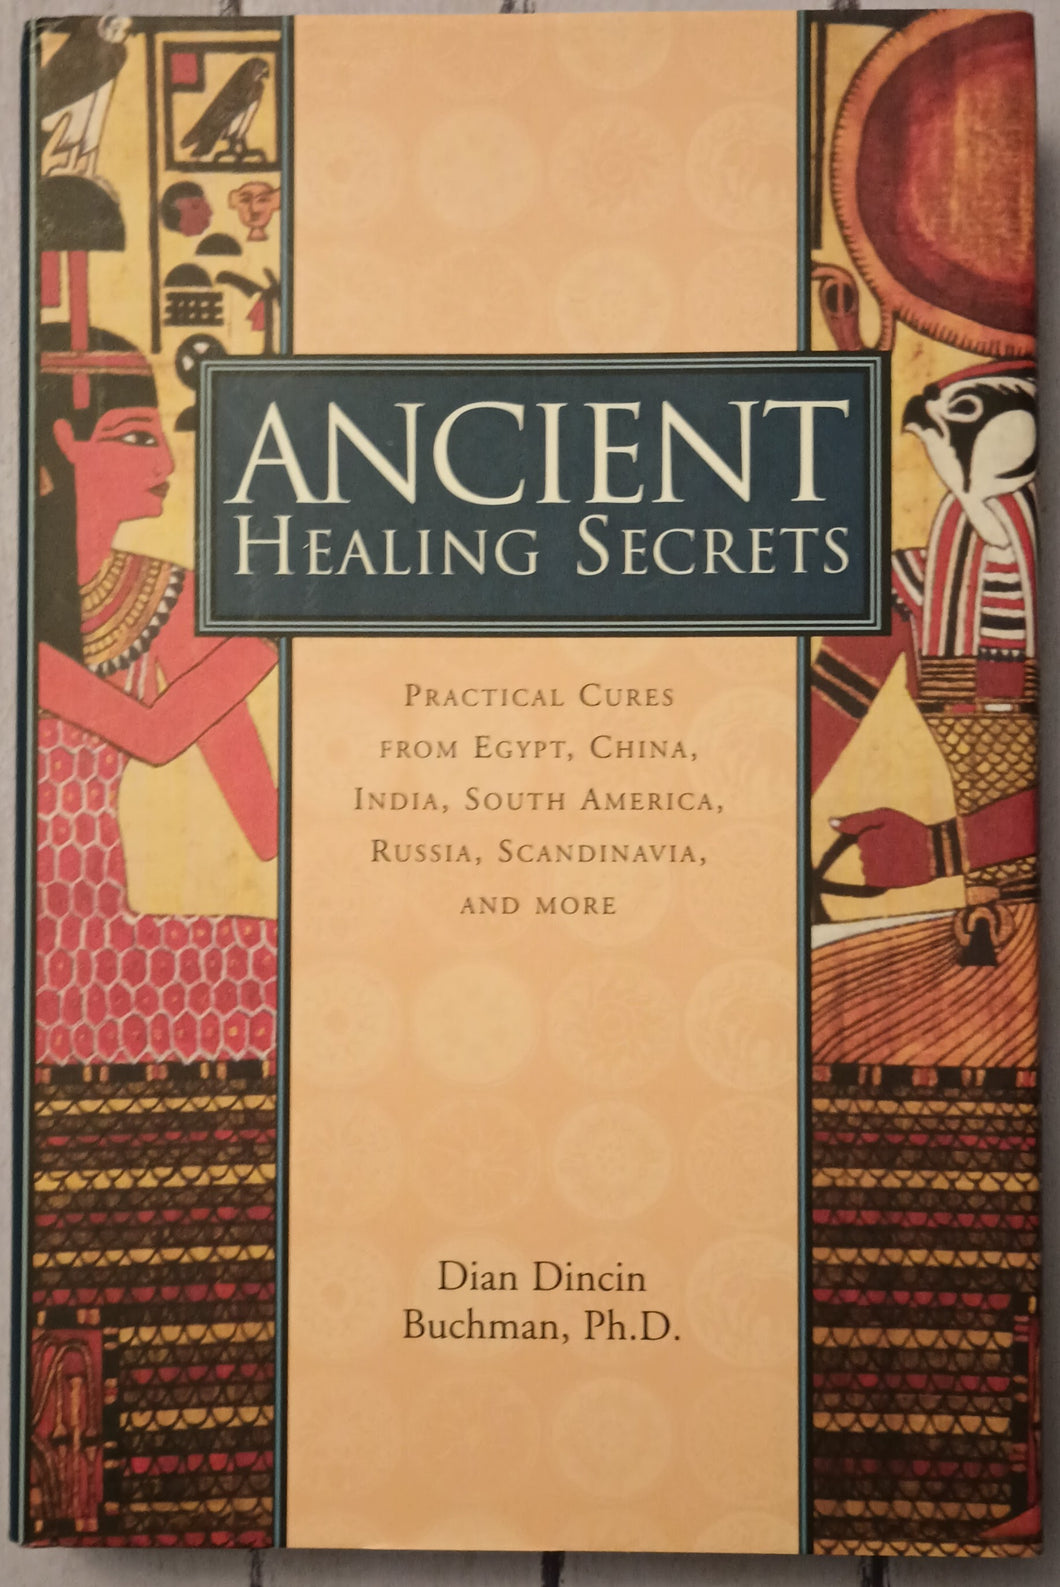 Ancient Healing Secrets: Pracitical Cures from Egypt, China, India, South America, Russia, Sandinavia, and More